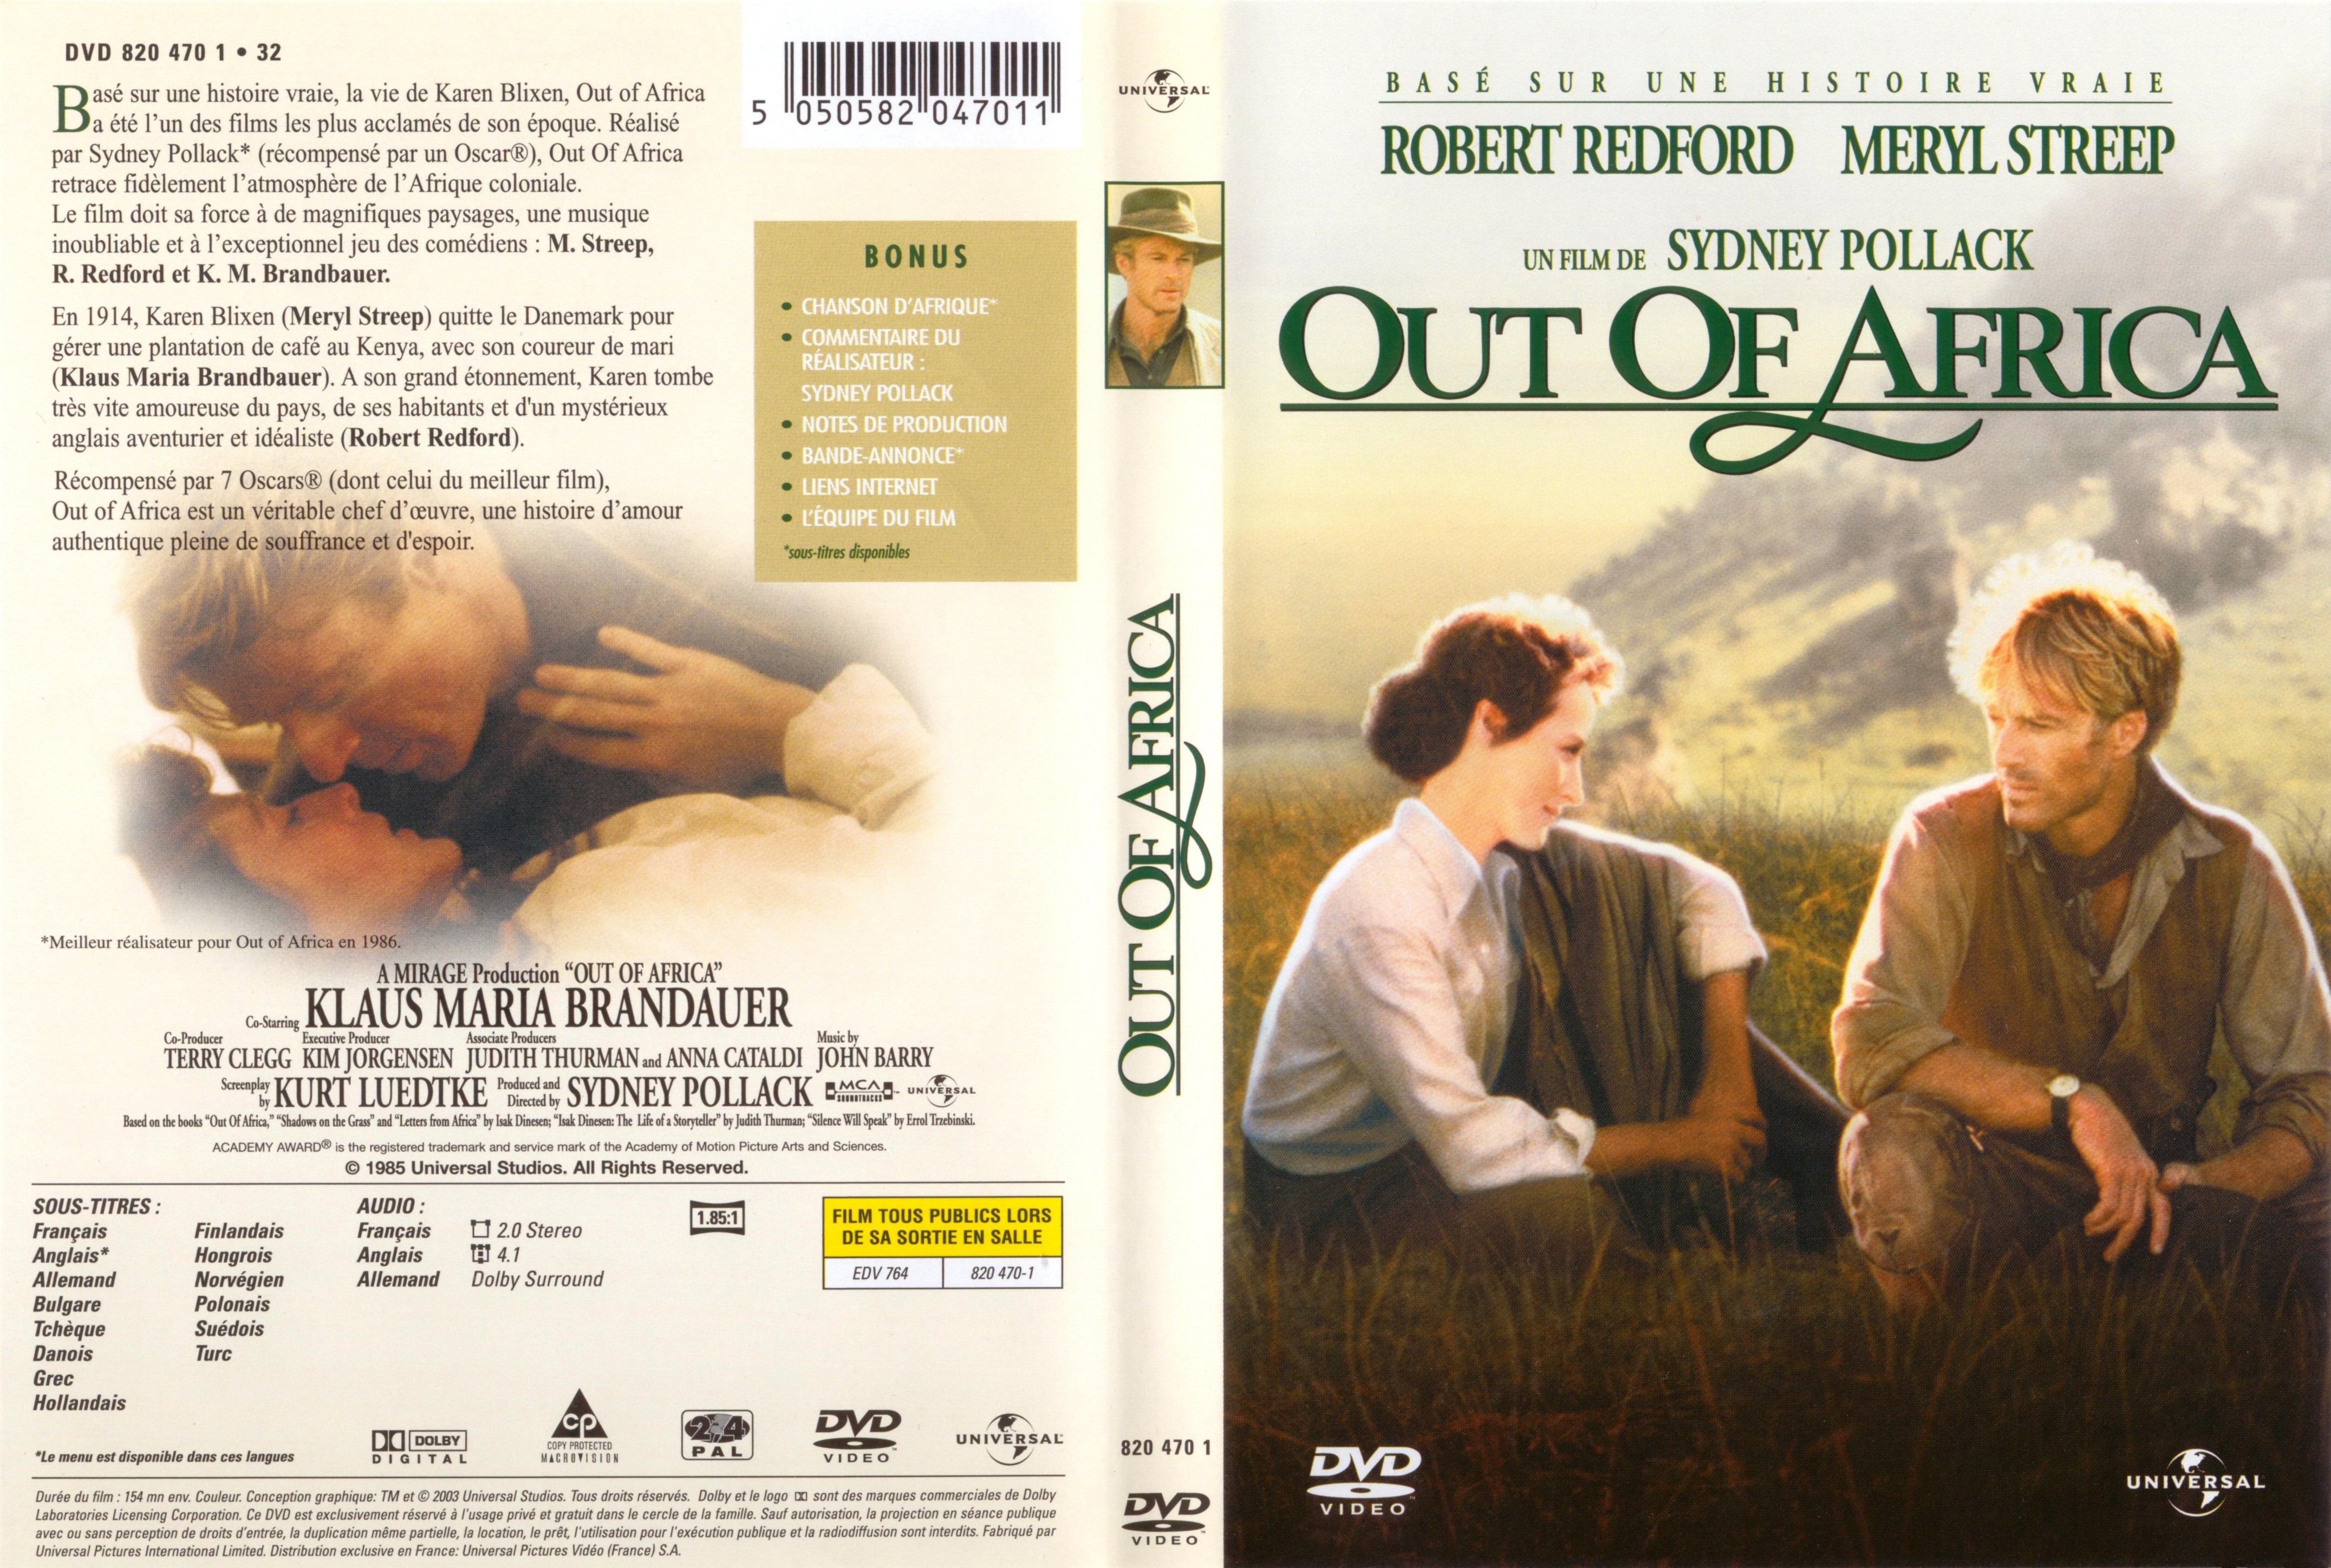 Jaquette DVD Out of Africa v2